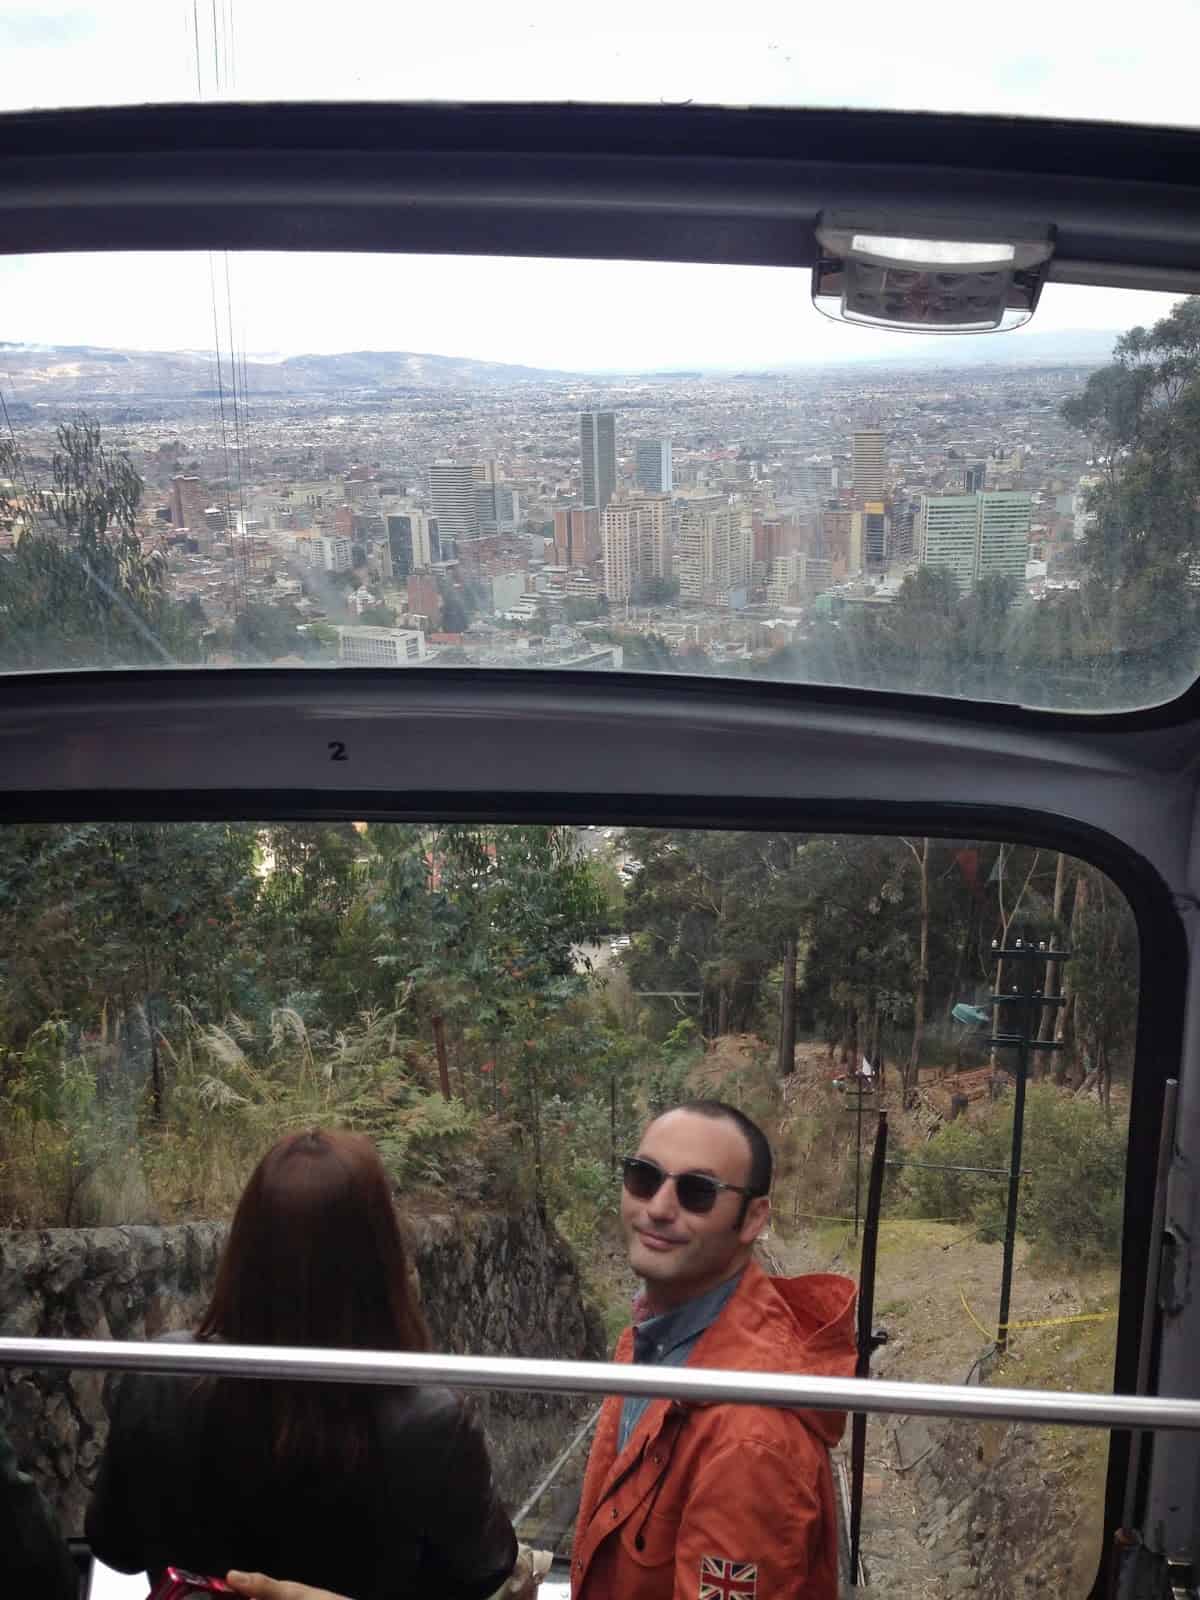 Riding the funicular to Monserrate in Bogotá, Colombia